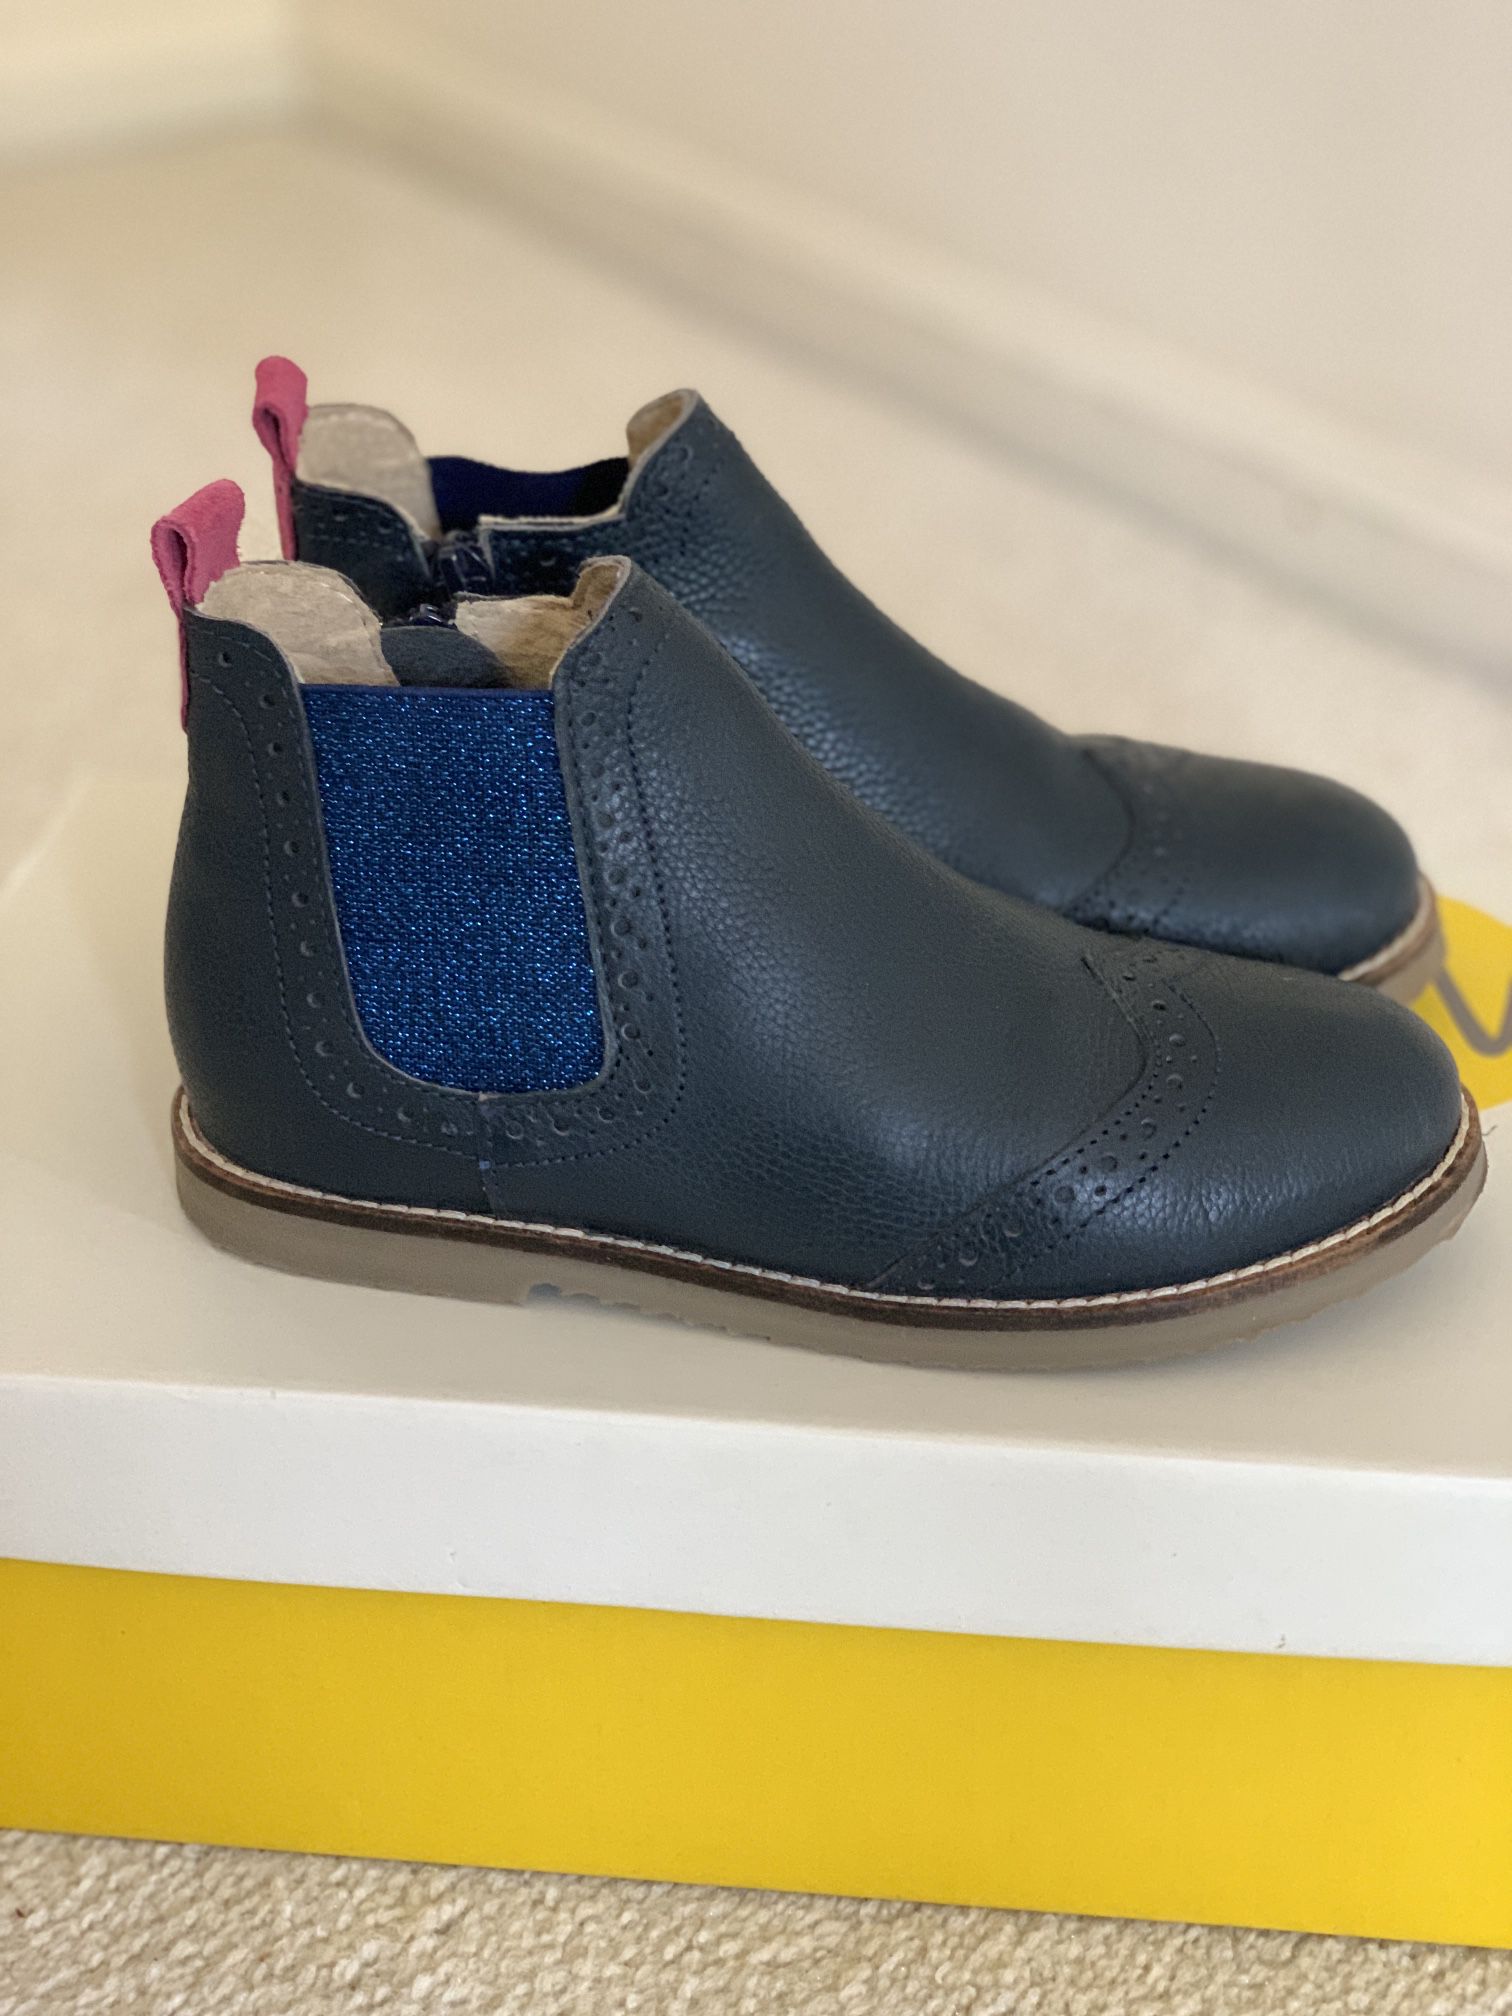 Mini Boden Blue Leather Boots, Girls Size 2 (Euro 33)